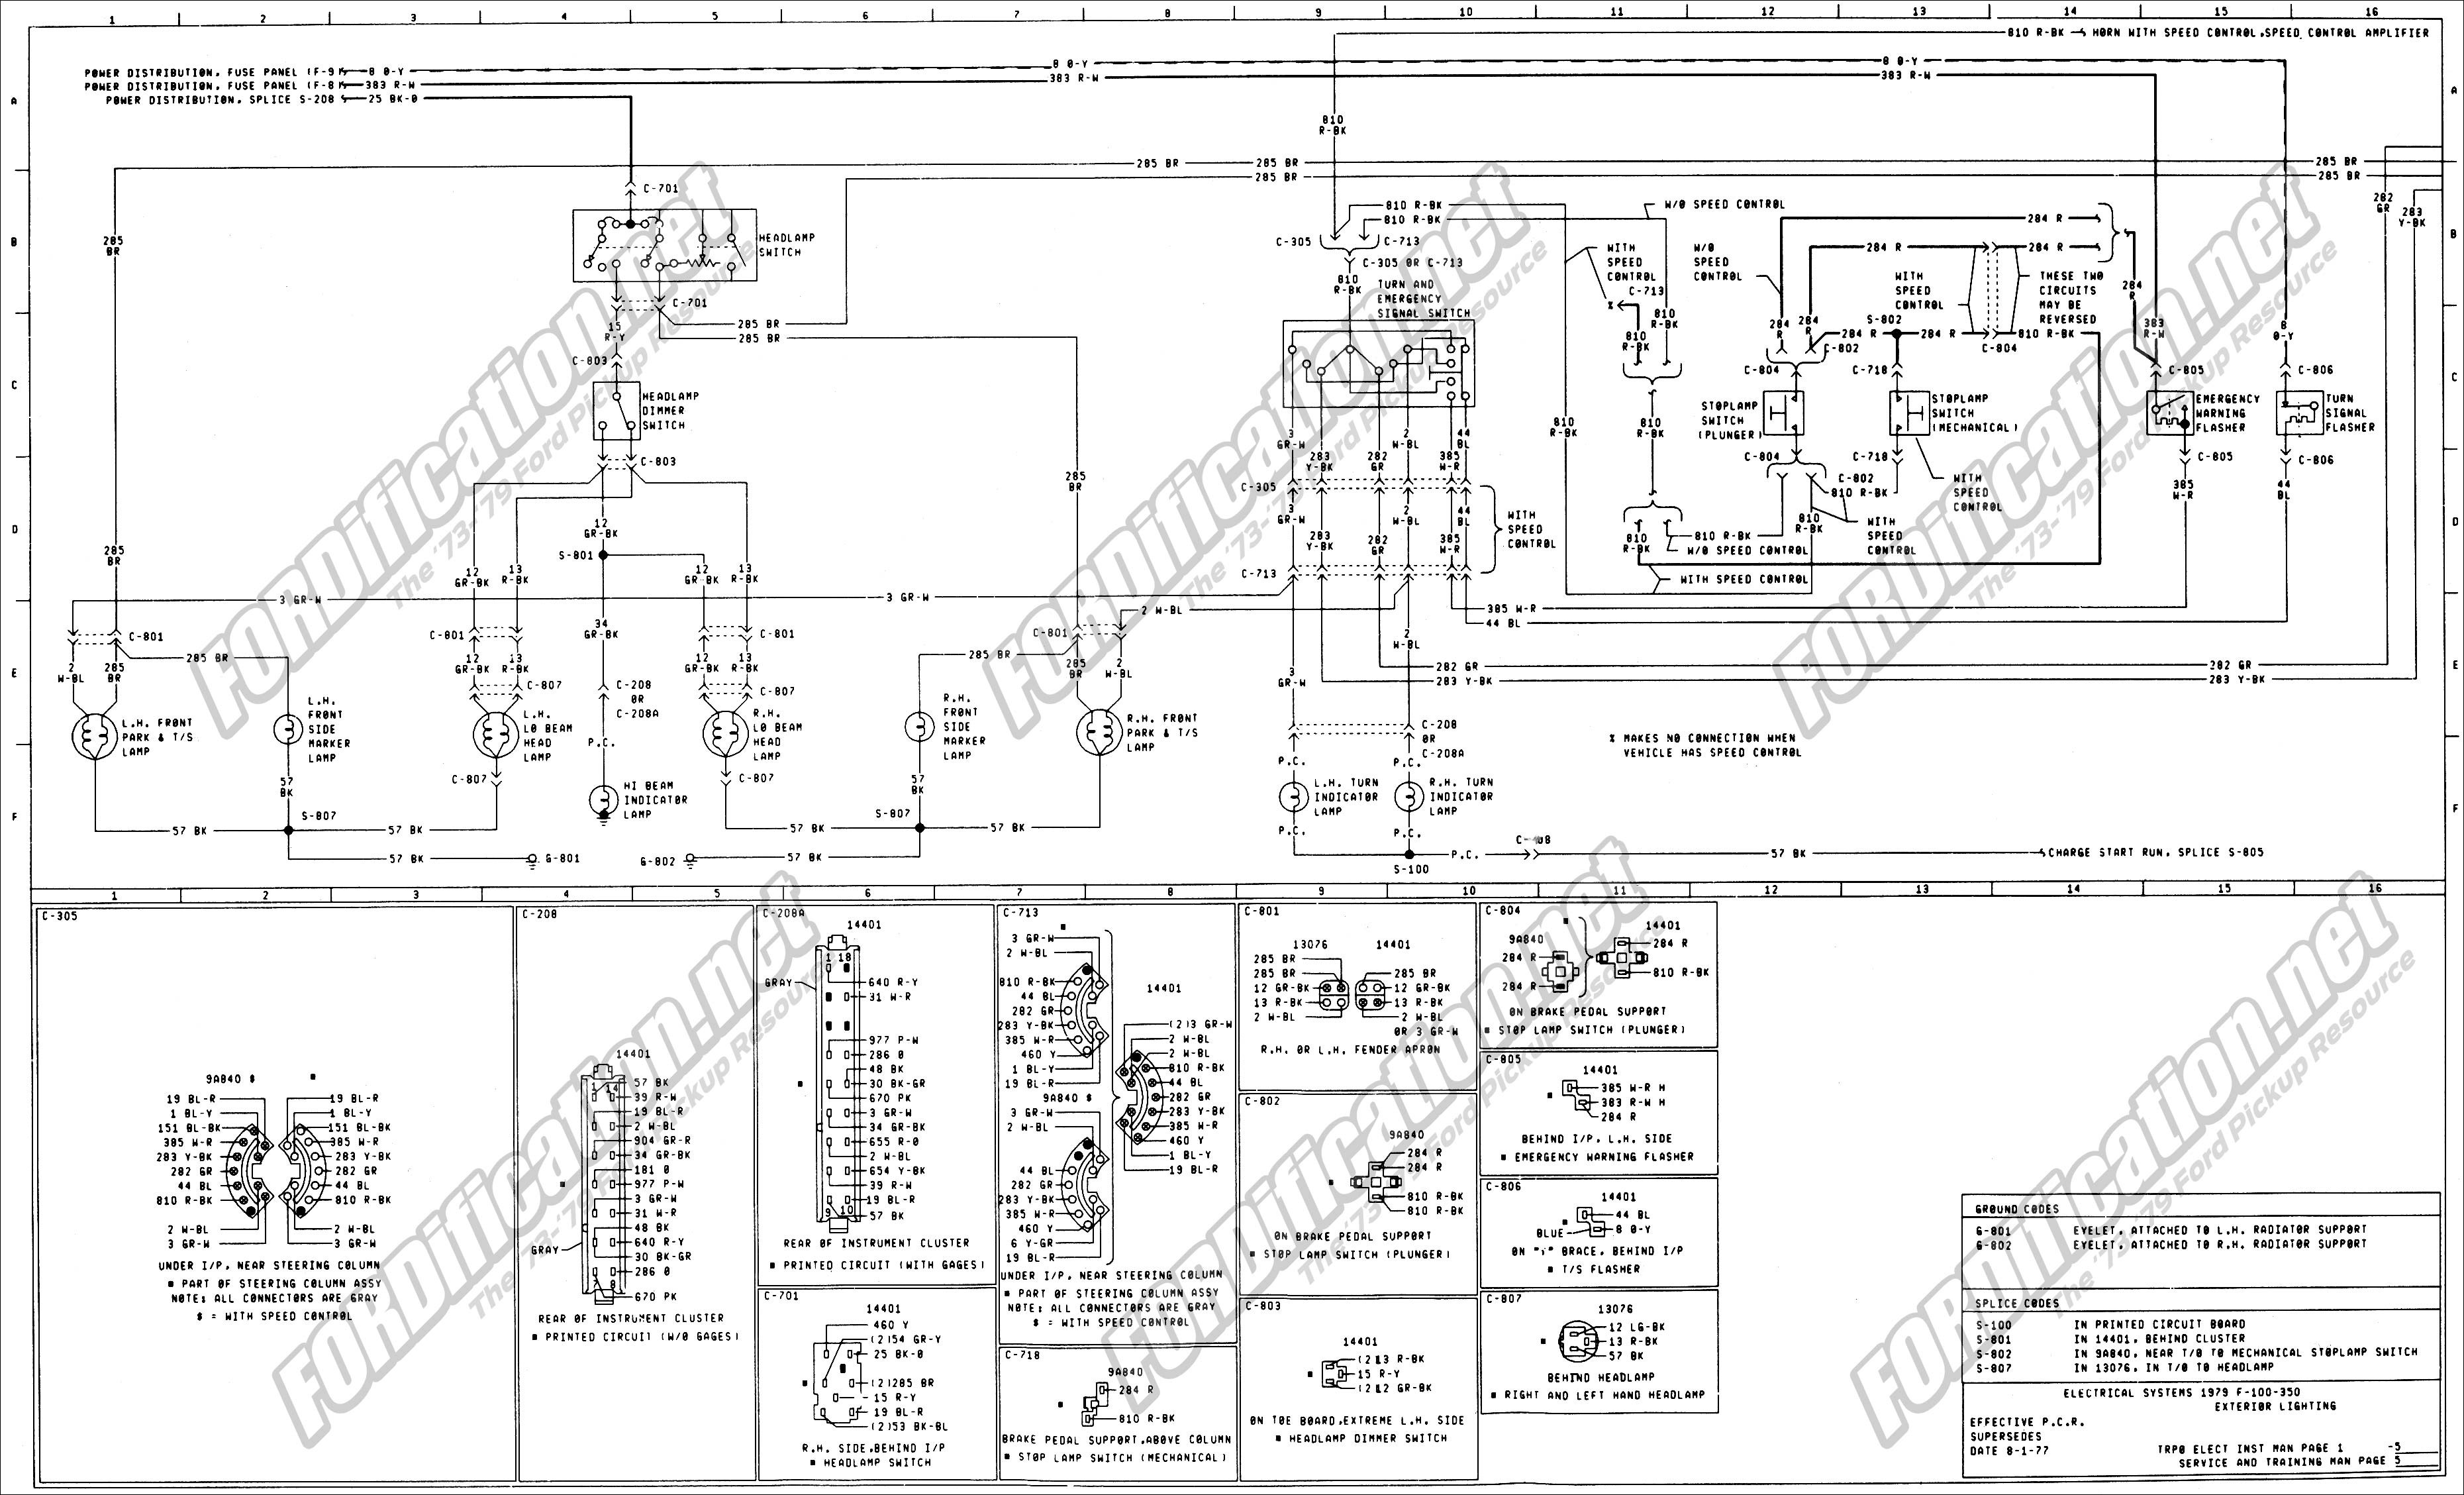 Ford F250 Engine Diagram 1973 1979 ford Truck Wiring Diagrams & Schematics fordification Of Ford F250 Engine Diagram